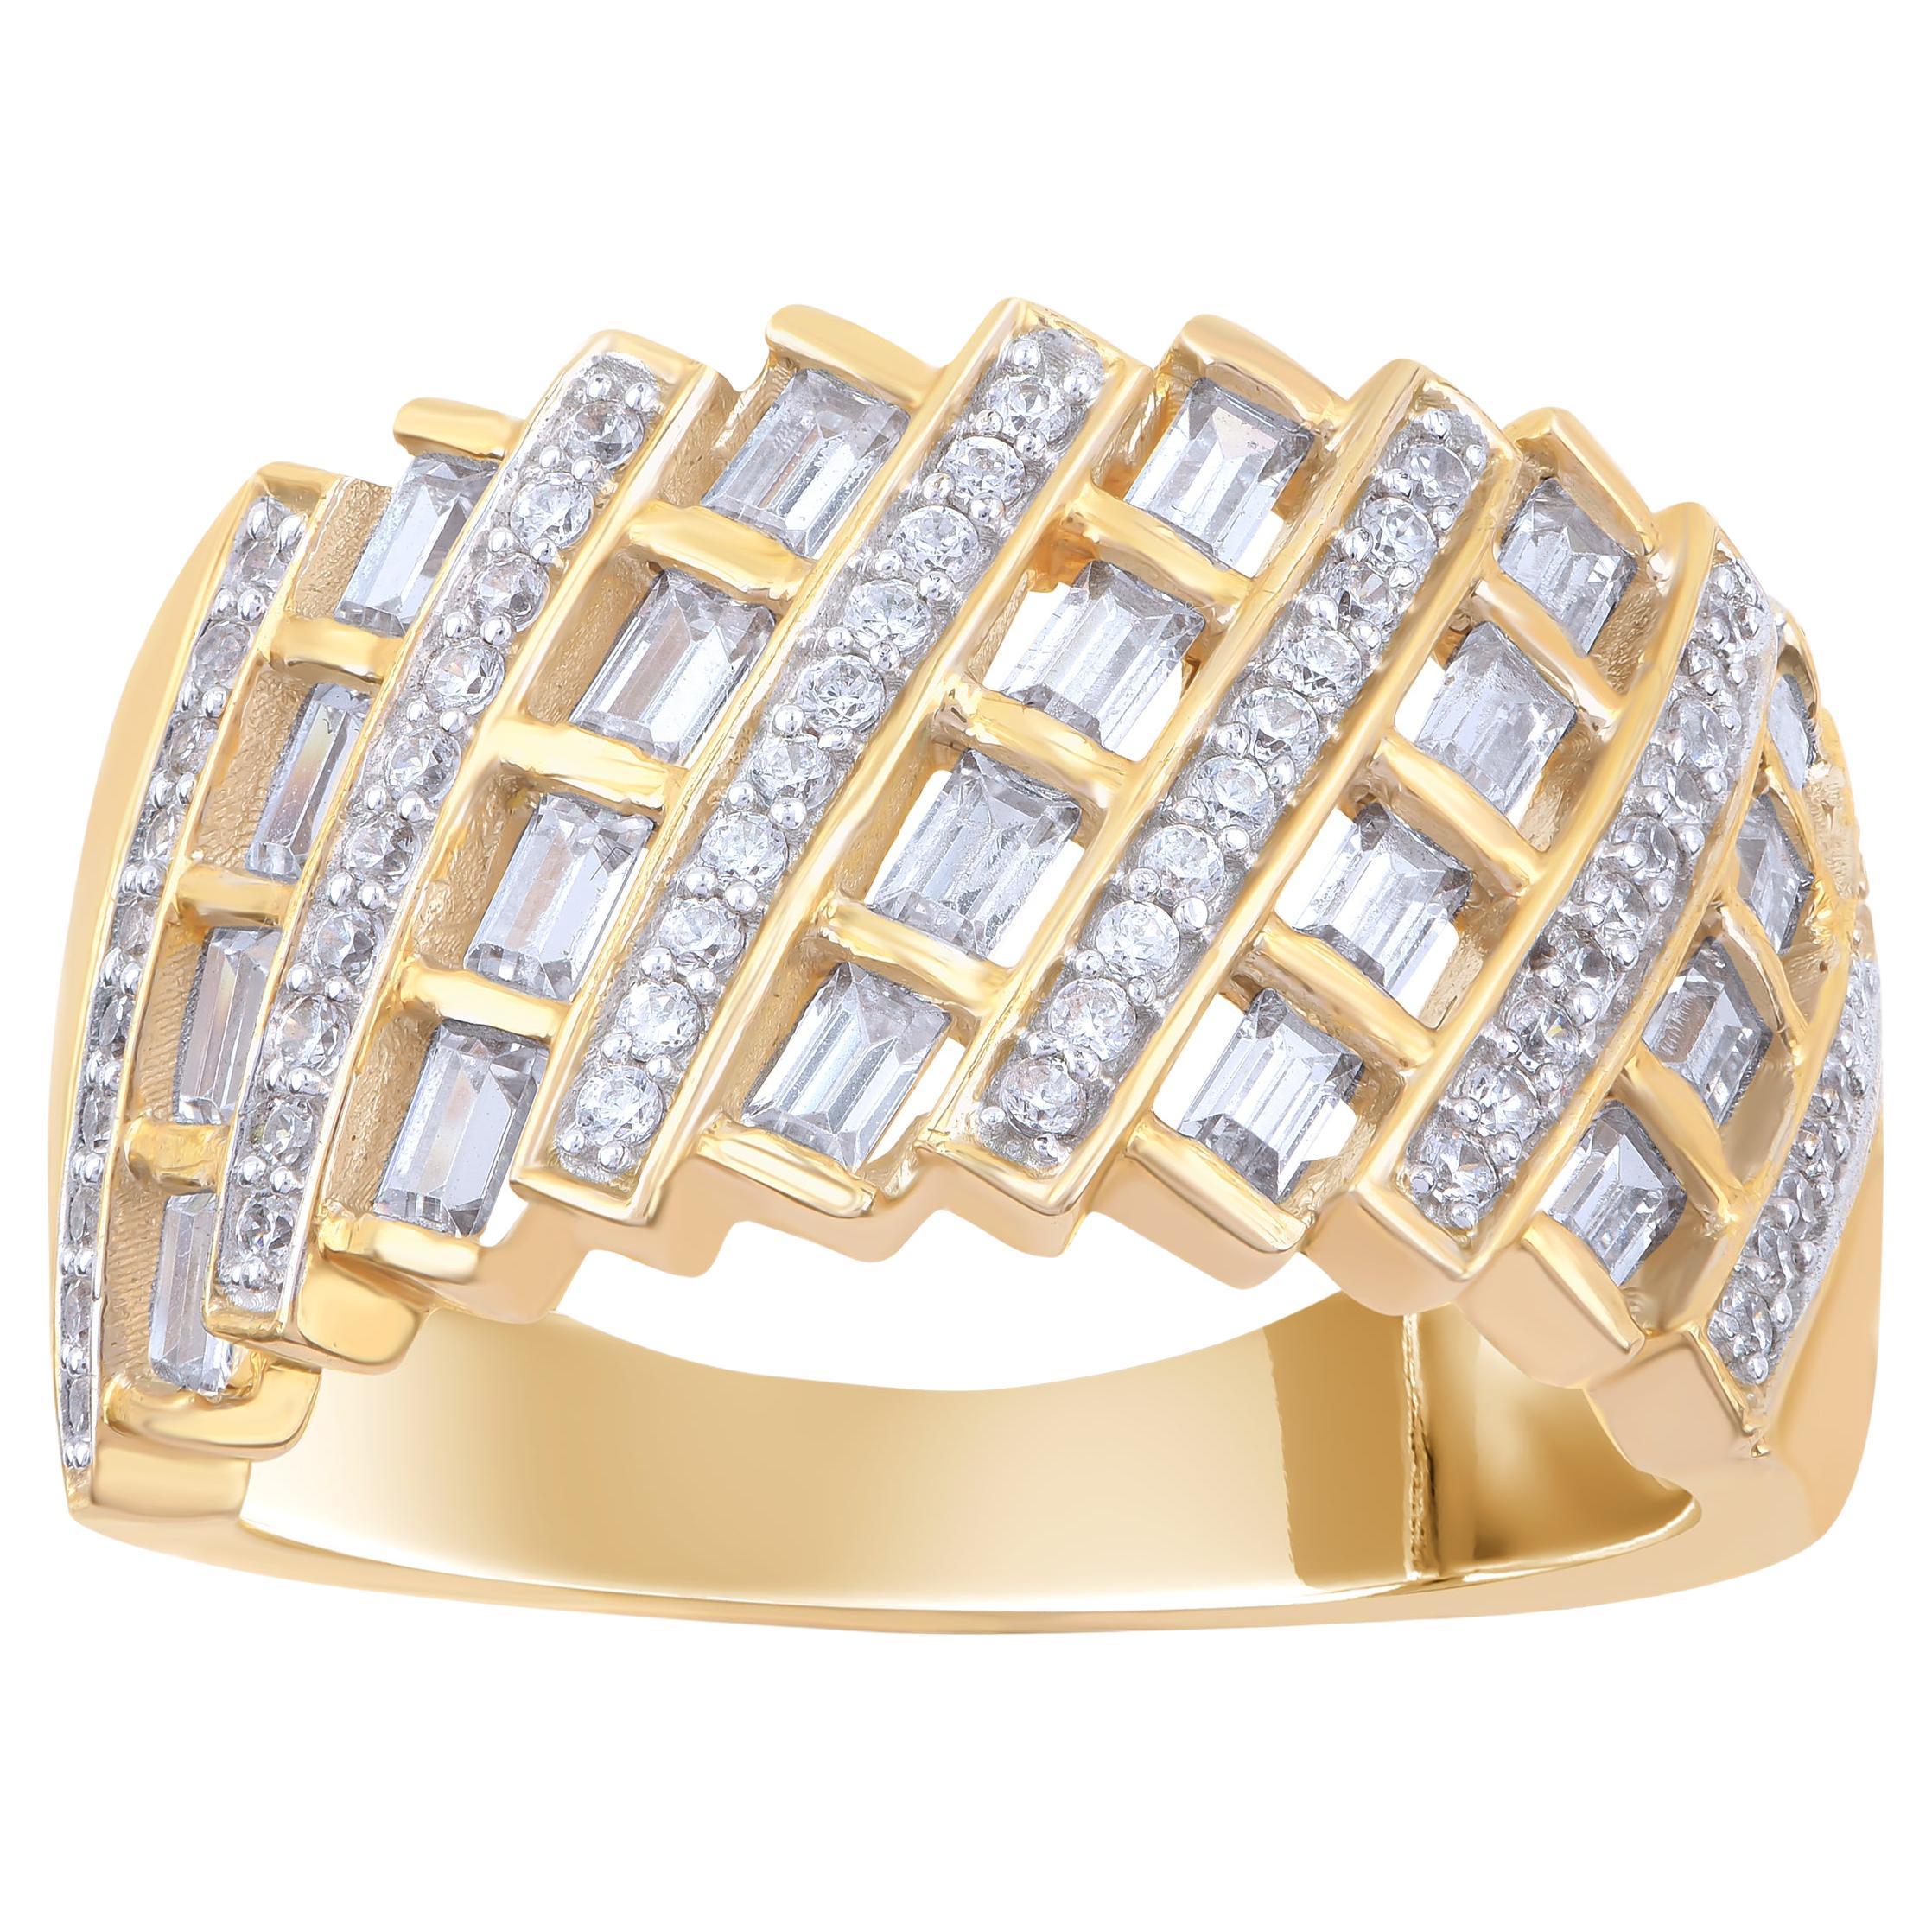 TJD 1.0 Carat Round & Baguette Cut Diamond 14KT Yellow Gold Wedding Band Ring For Sale